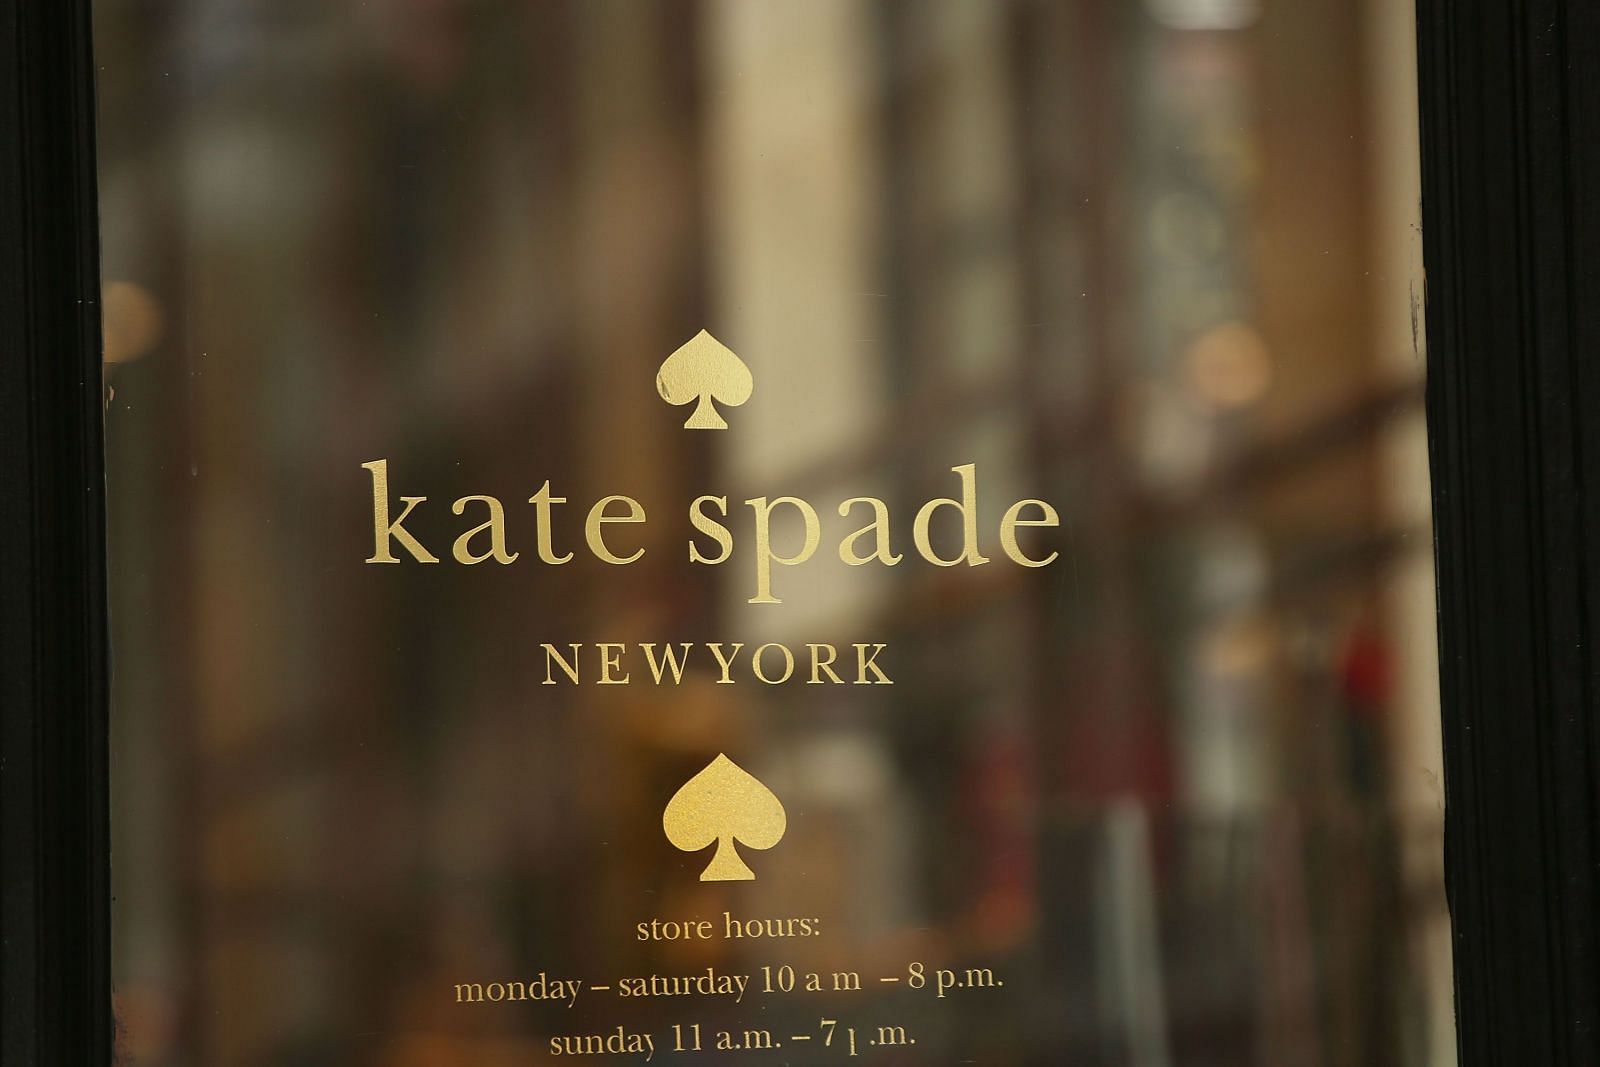 Coach buys Kate Spade in 